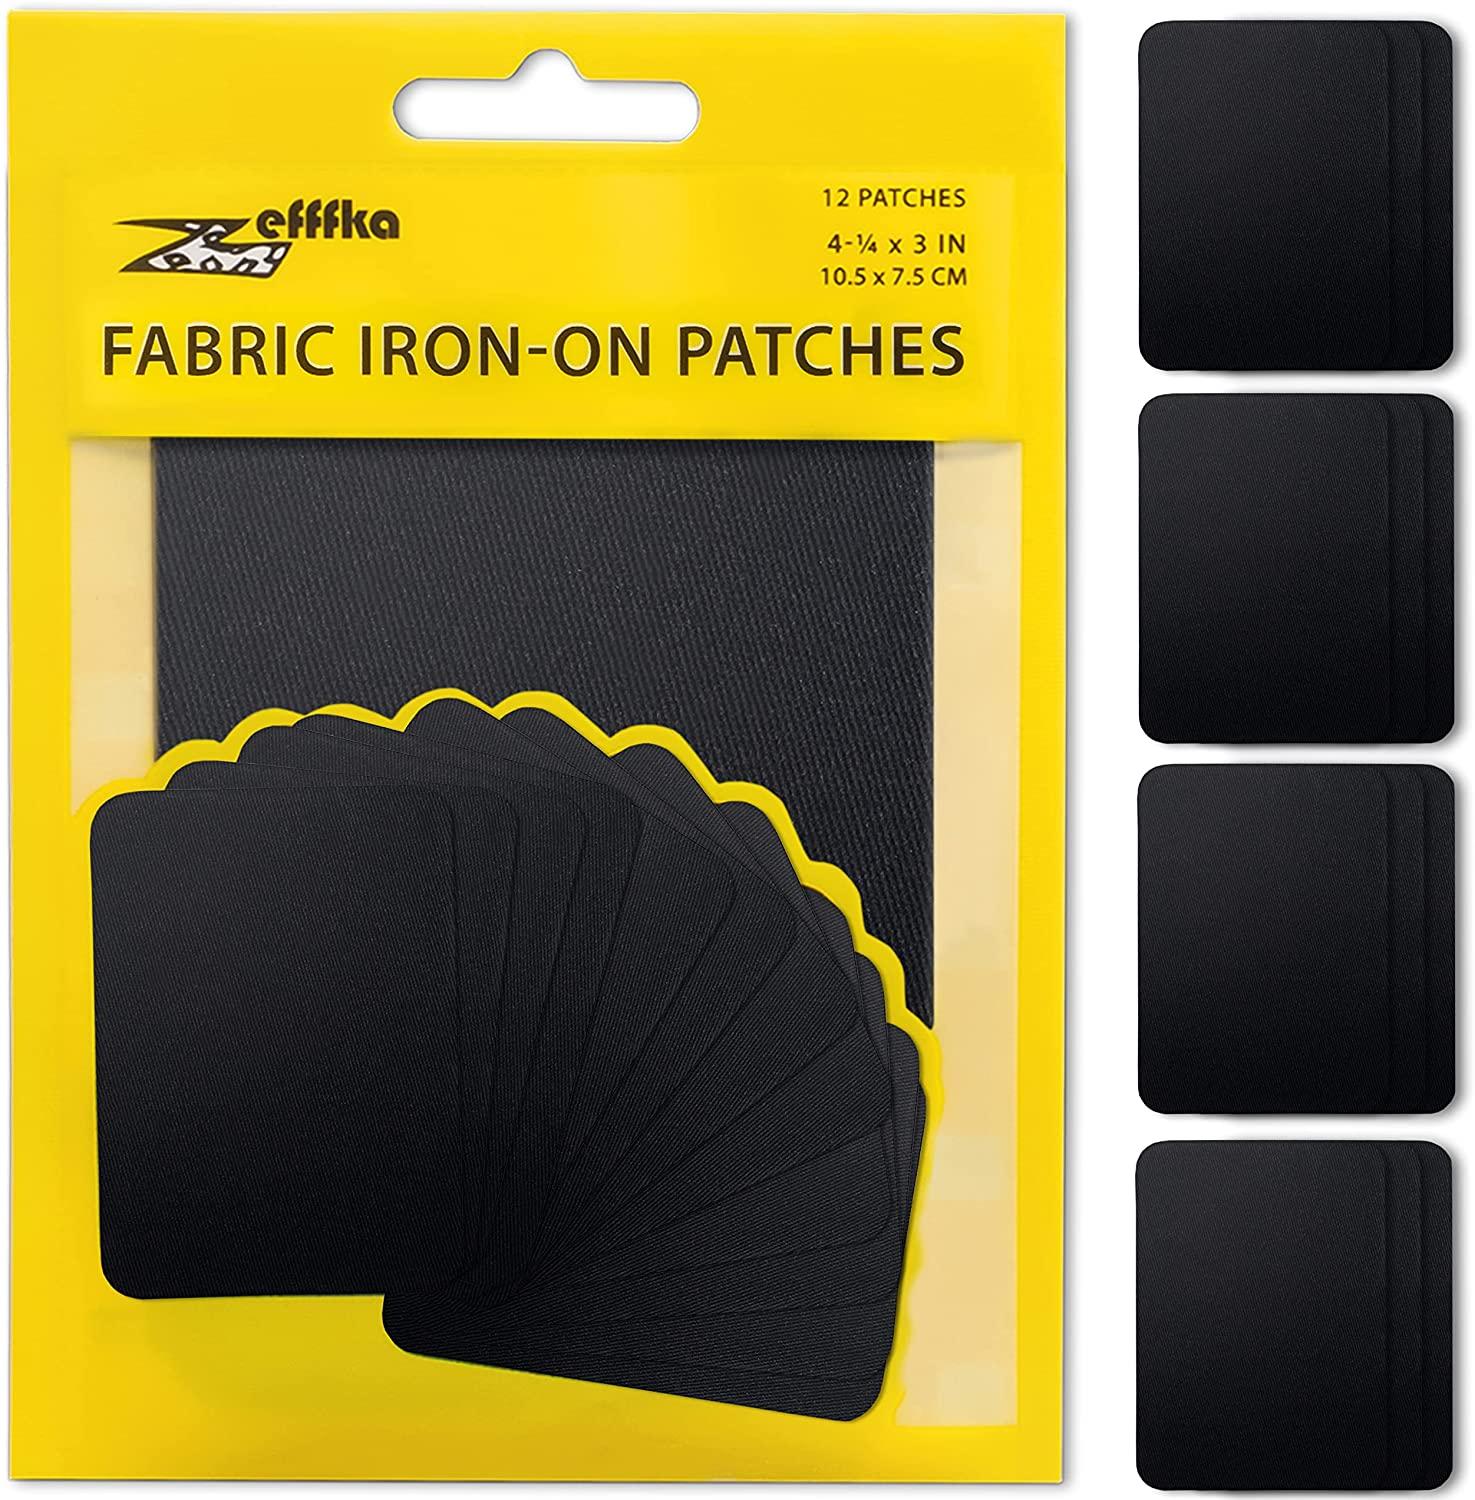 ZEFFFKA Cotton Iron-On Clothing Patches, 12-Piece